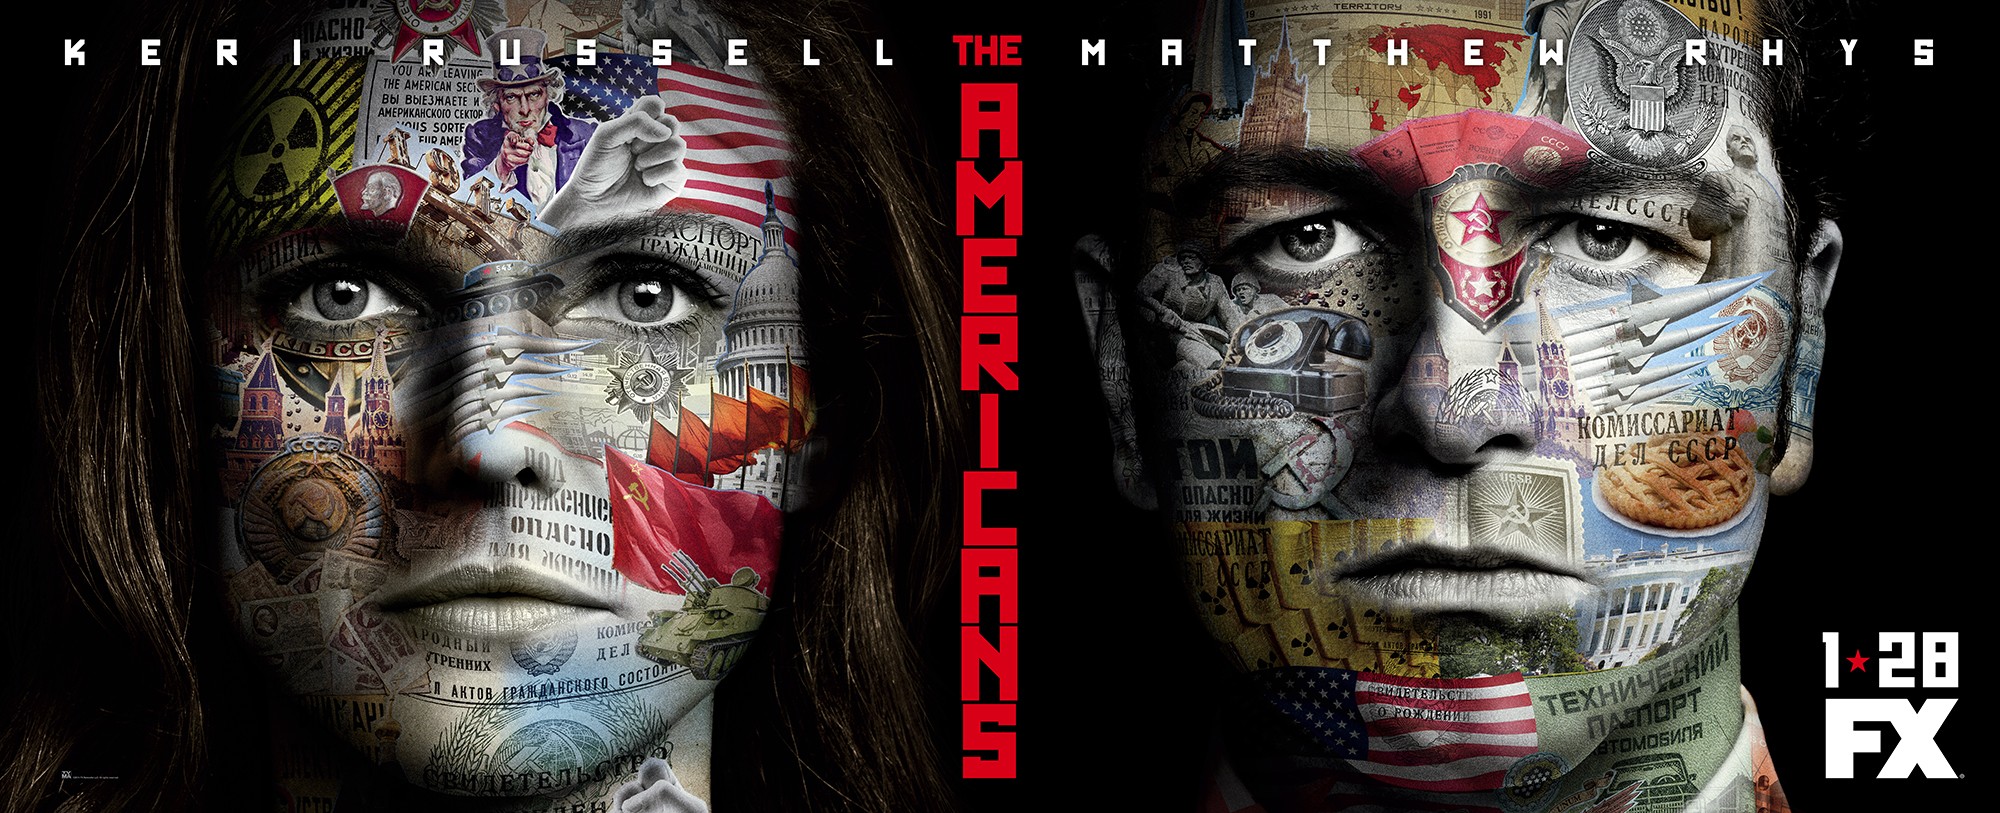 Mega Sized TV Poster Image for The Americans (#6 of 16)